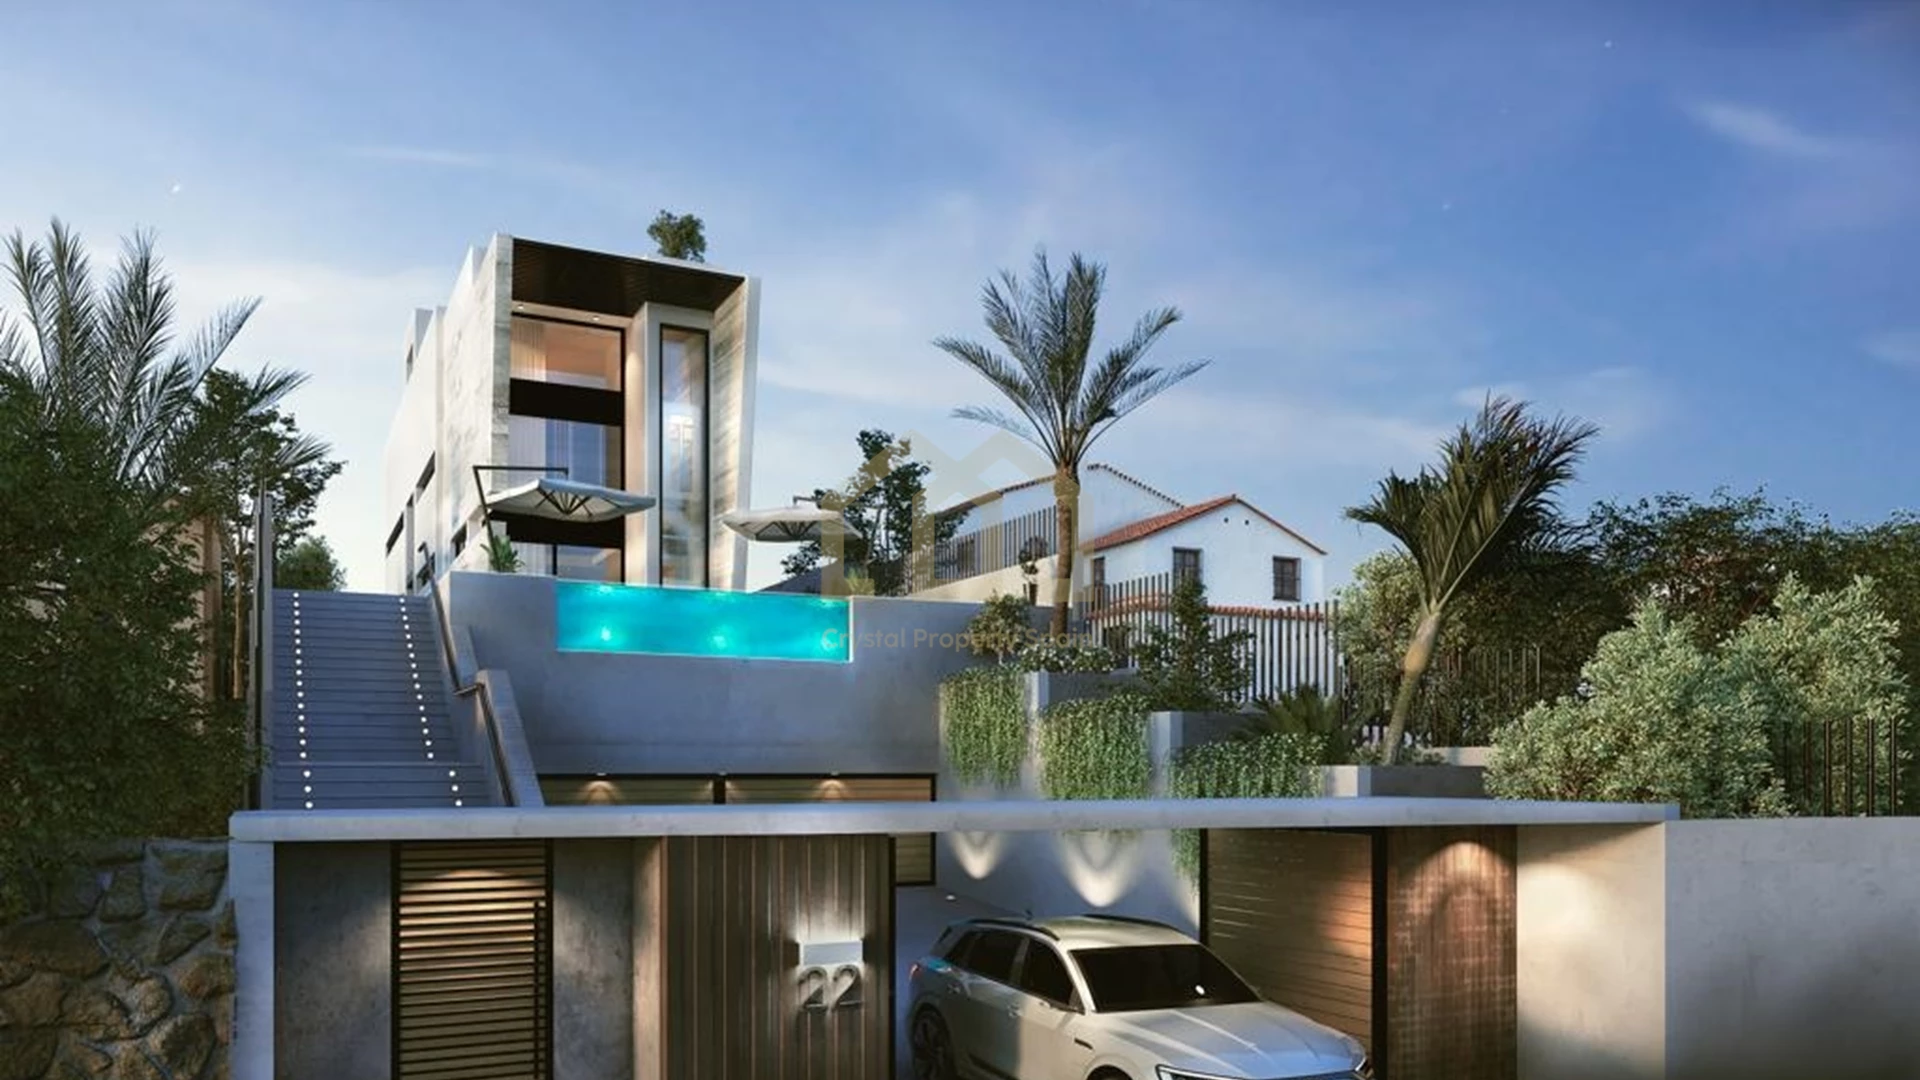 Torrevieja, Los Balcones, Villa, CPL1/177, Contemporary and luxurious villa with private elevator and private pool